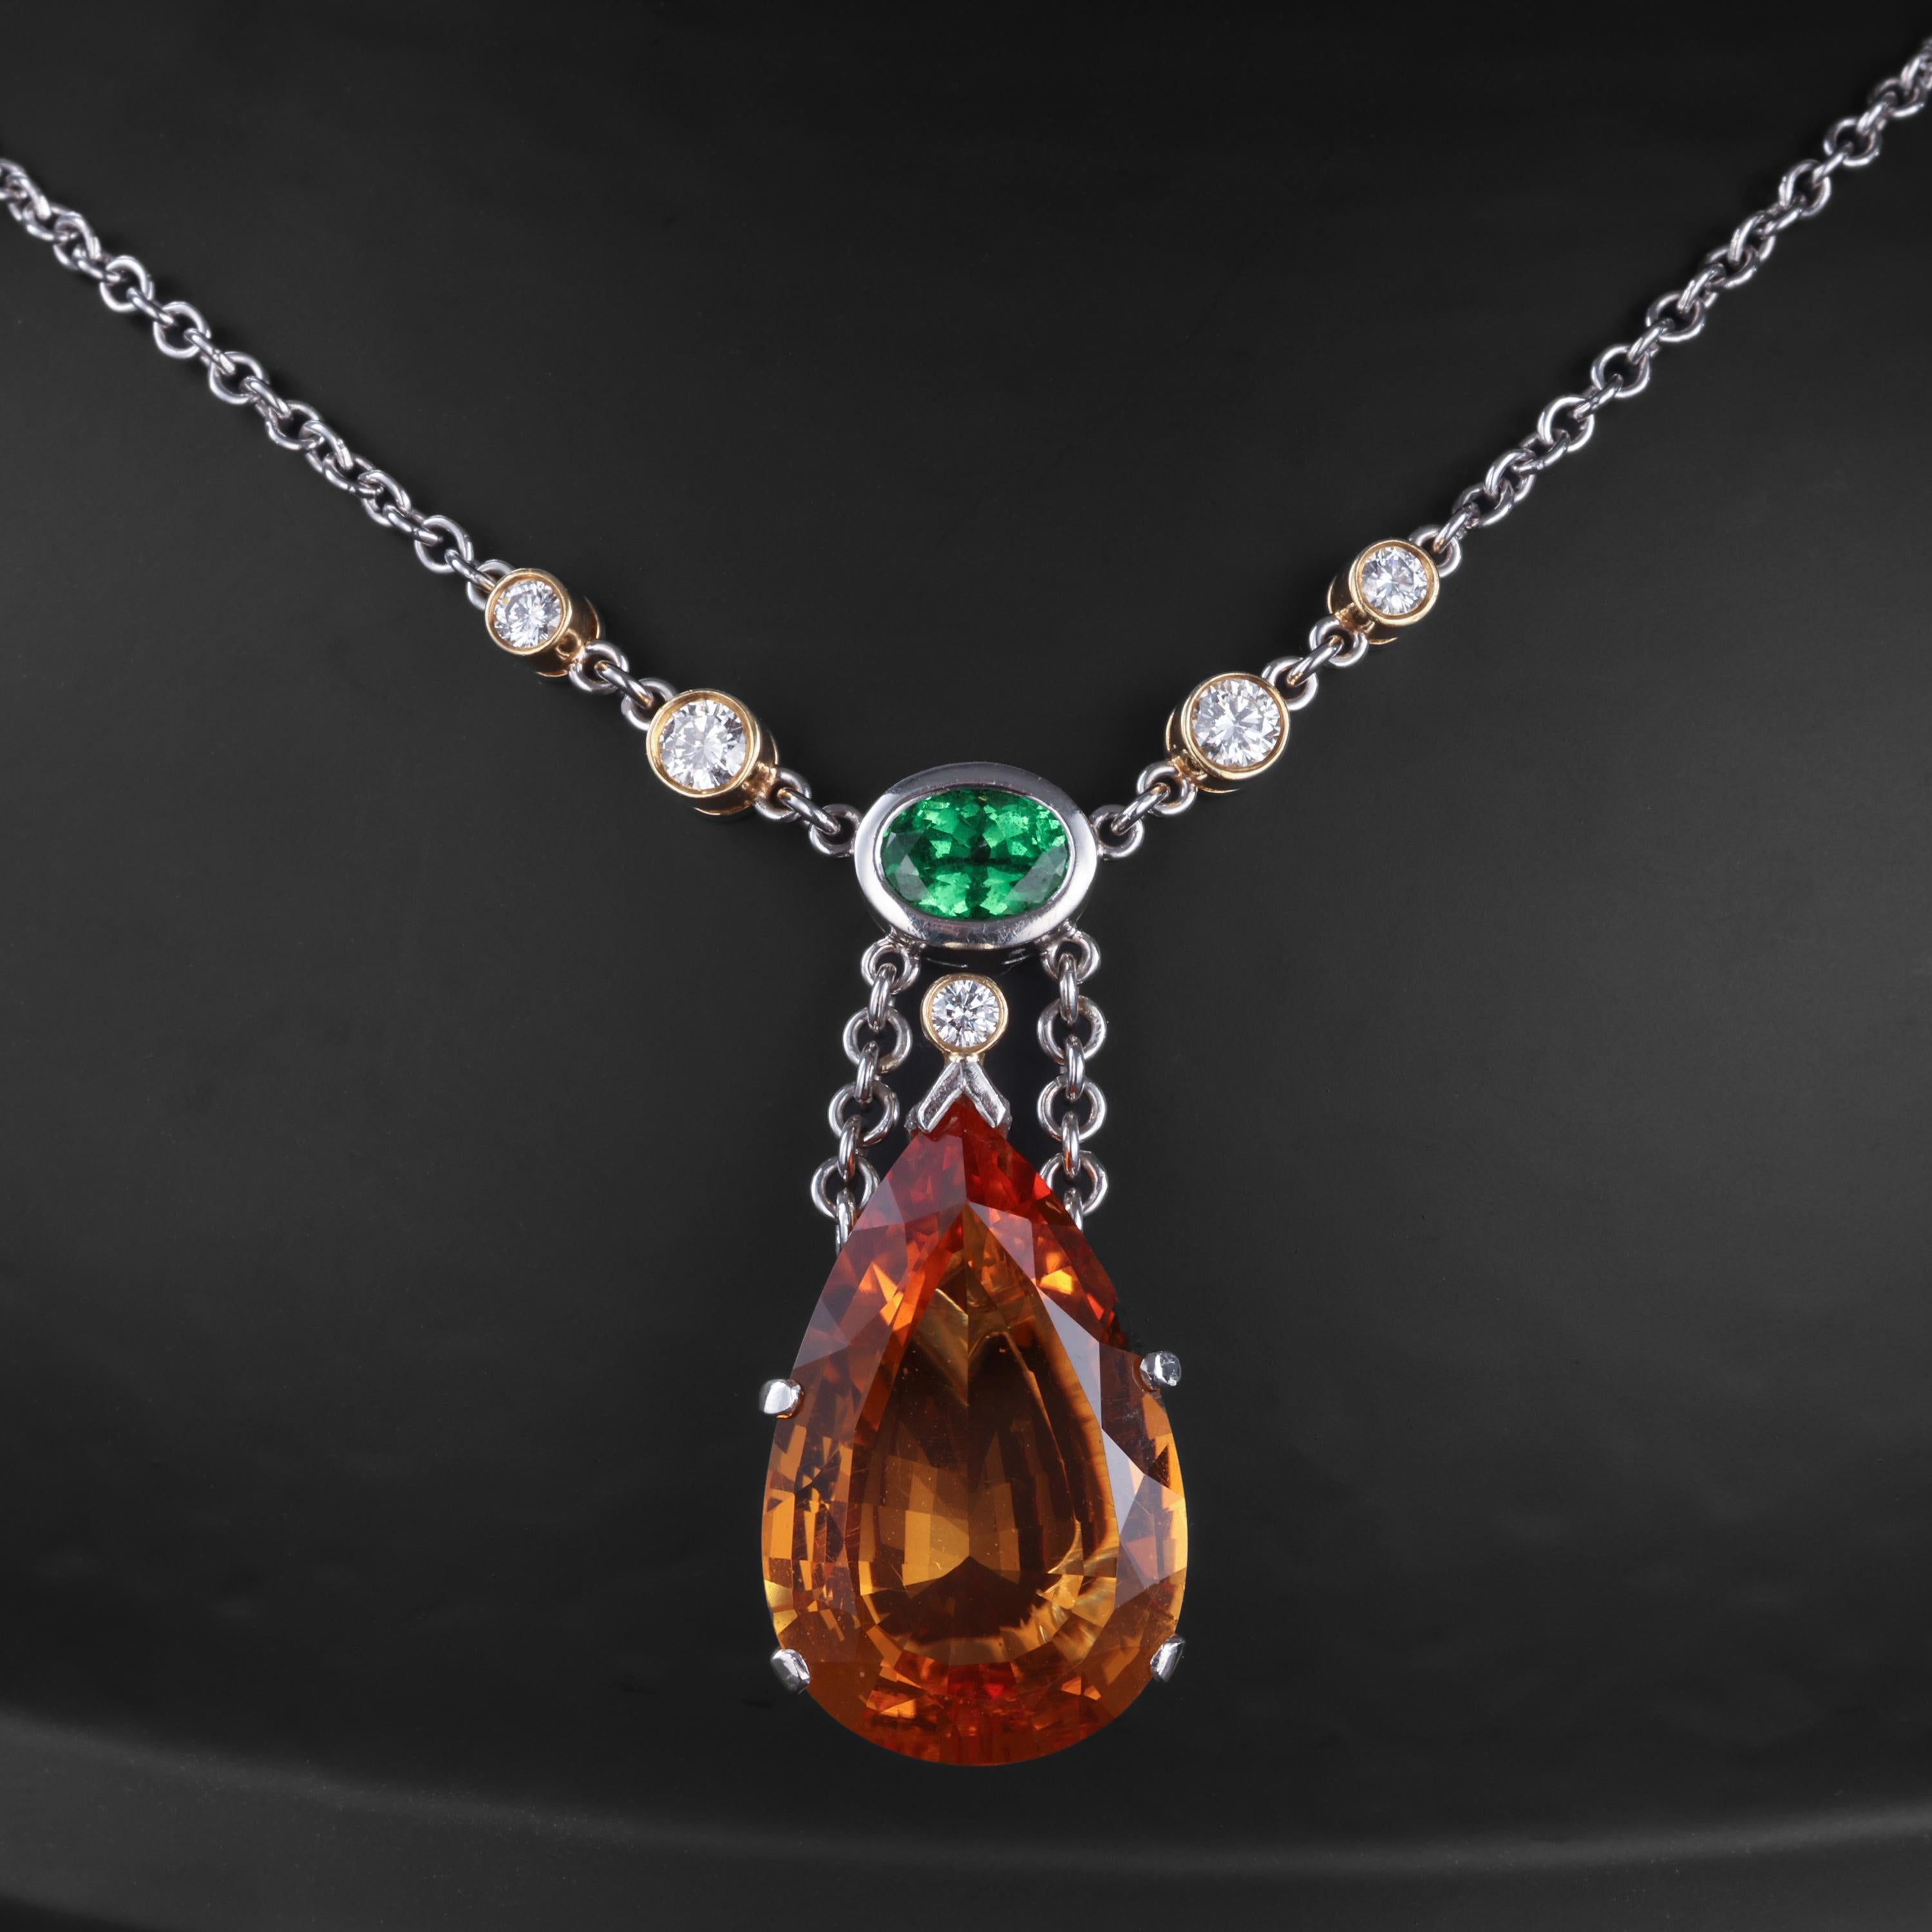 A colorful and contemporary unisex citrine, tsavorite garnet, and diamond necklace hand-crafted in sturdy, gleaming platinum. Perfect for everyday wear, it's both casual and elegant for a man or a woman.

A nearly 12-carat amber-yellow pear-shaped